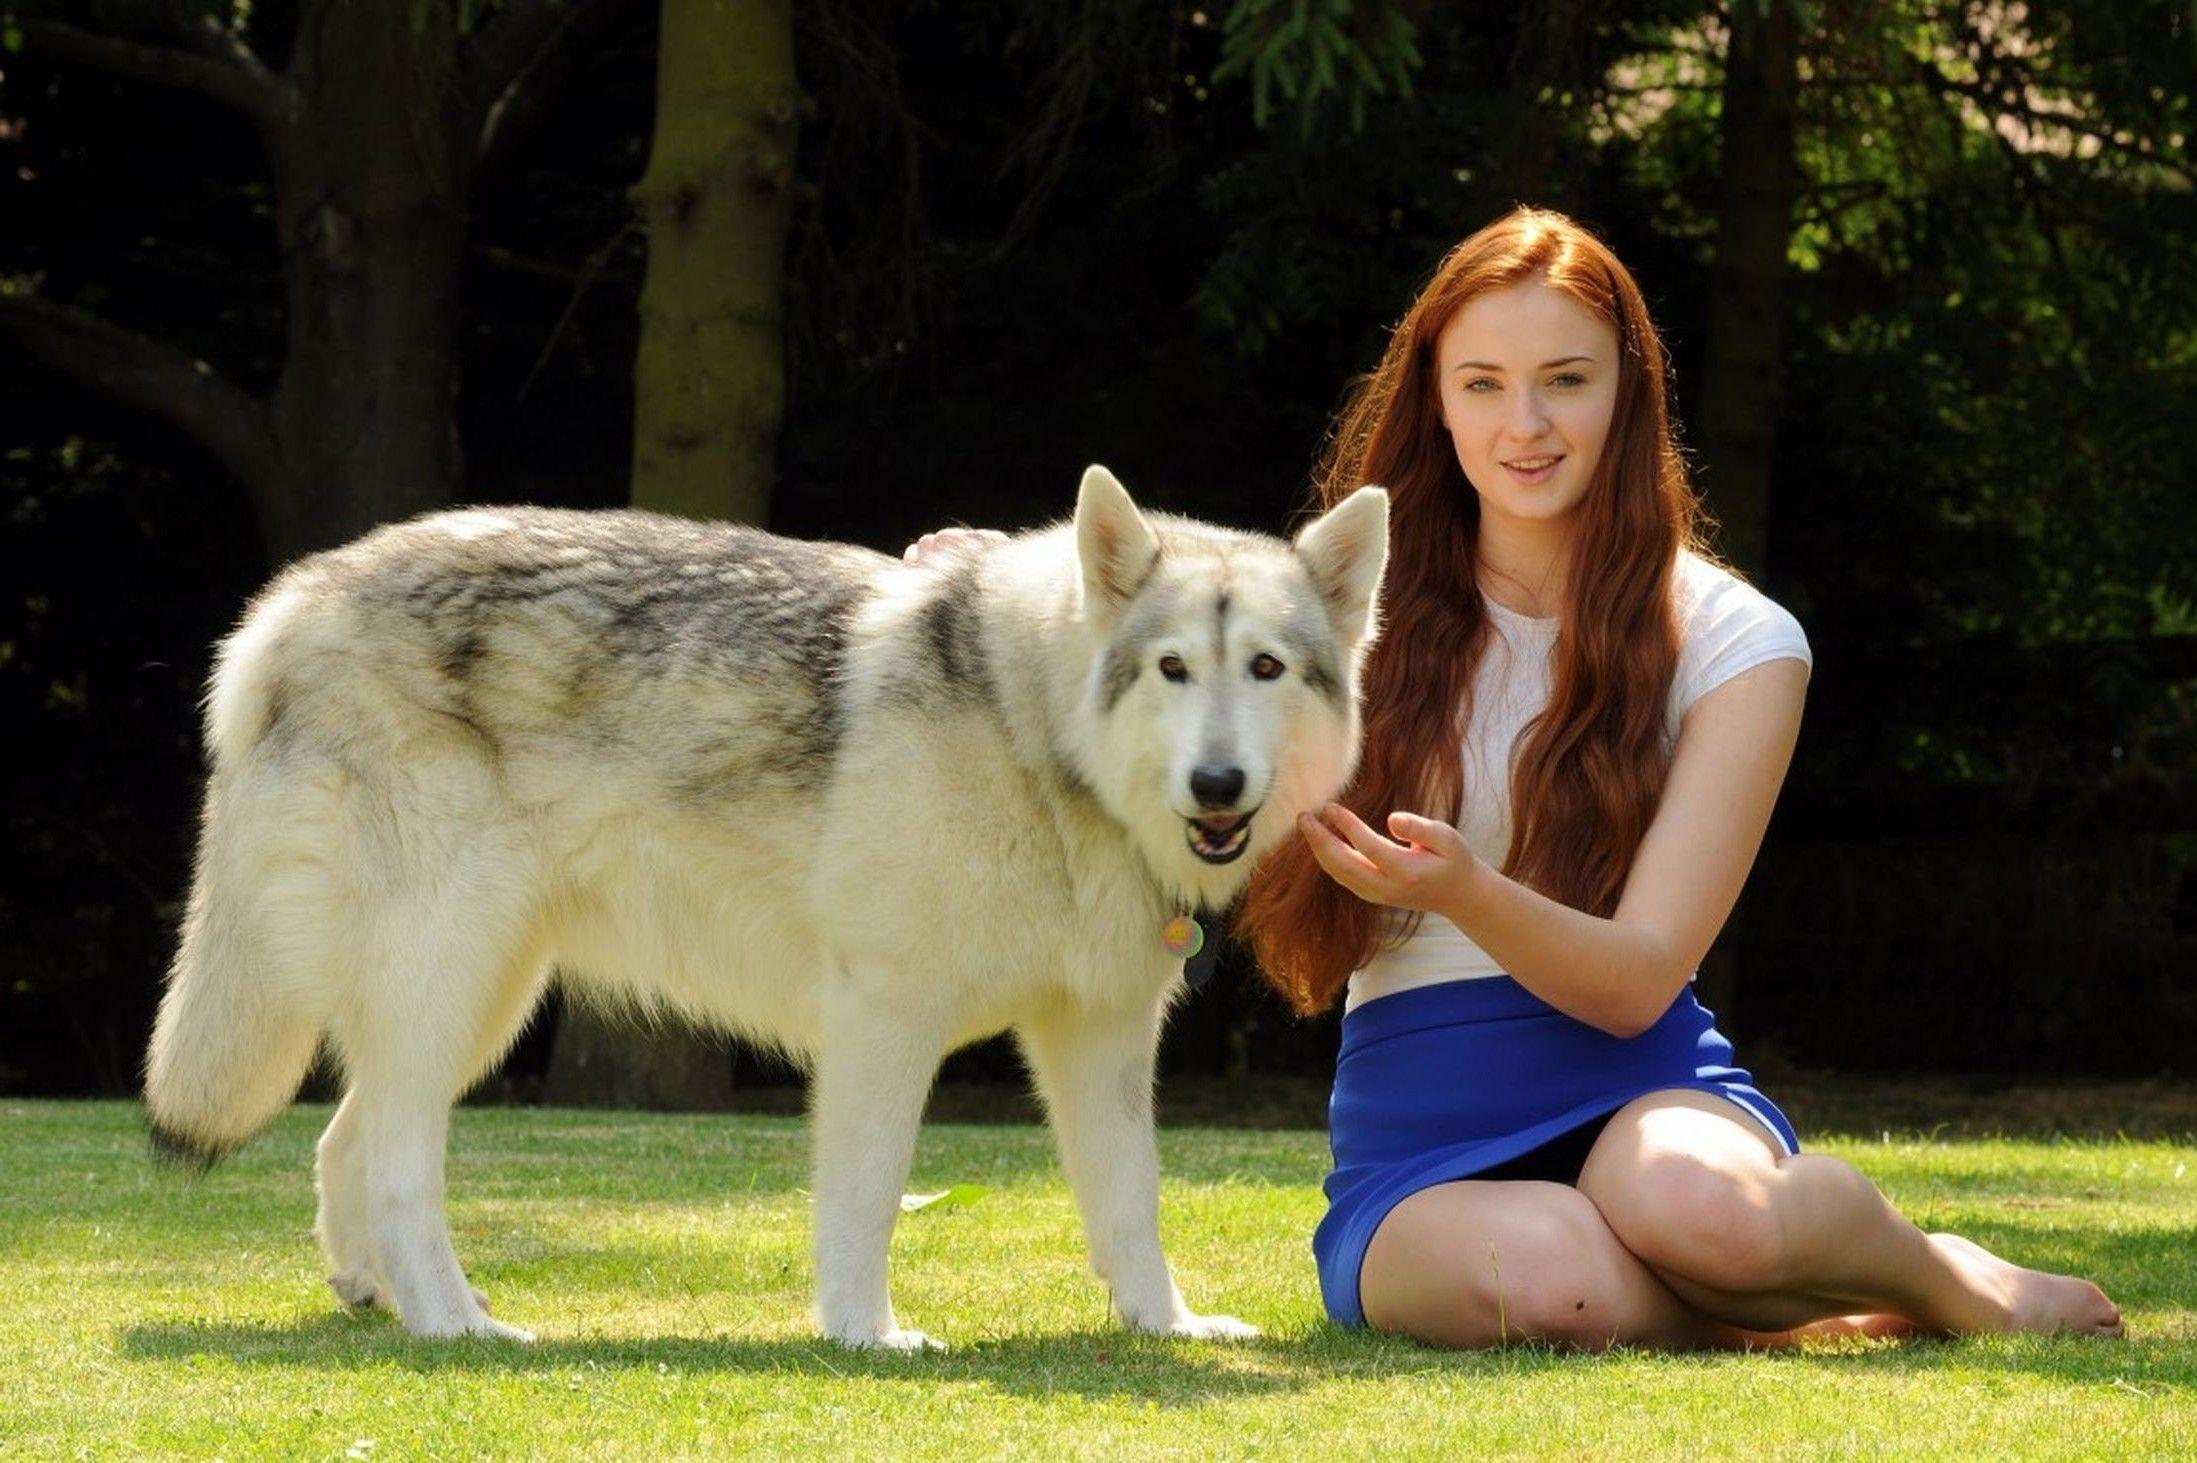 Sophie Turner, Game Of Thrones, Actress, Women, Redhead, Barefoot